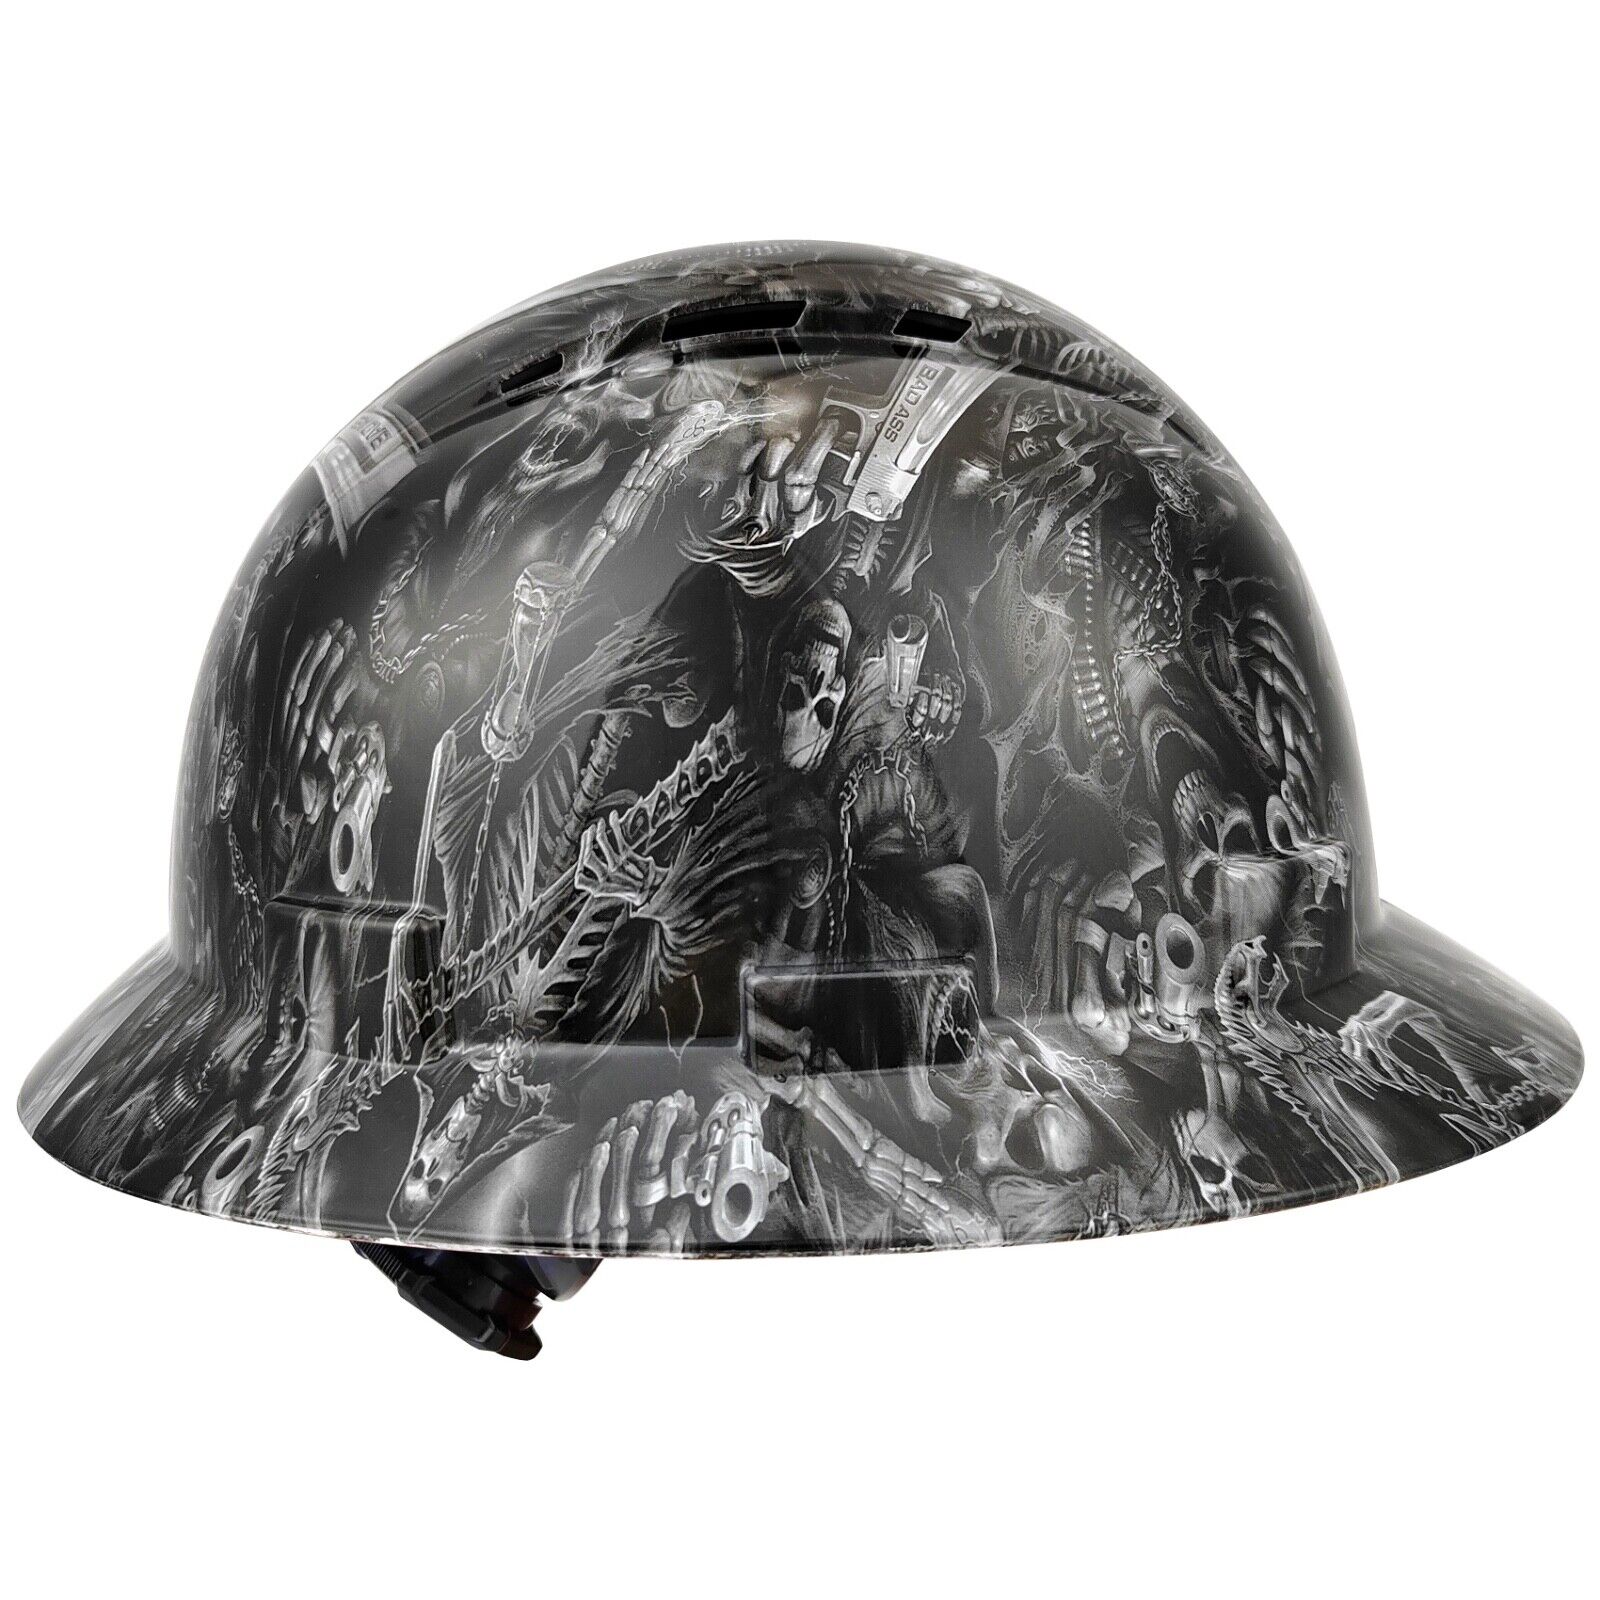 Crew Full Brim Hard Hat with Fas-trac Suspension With Cooling Vents